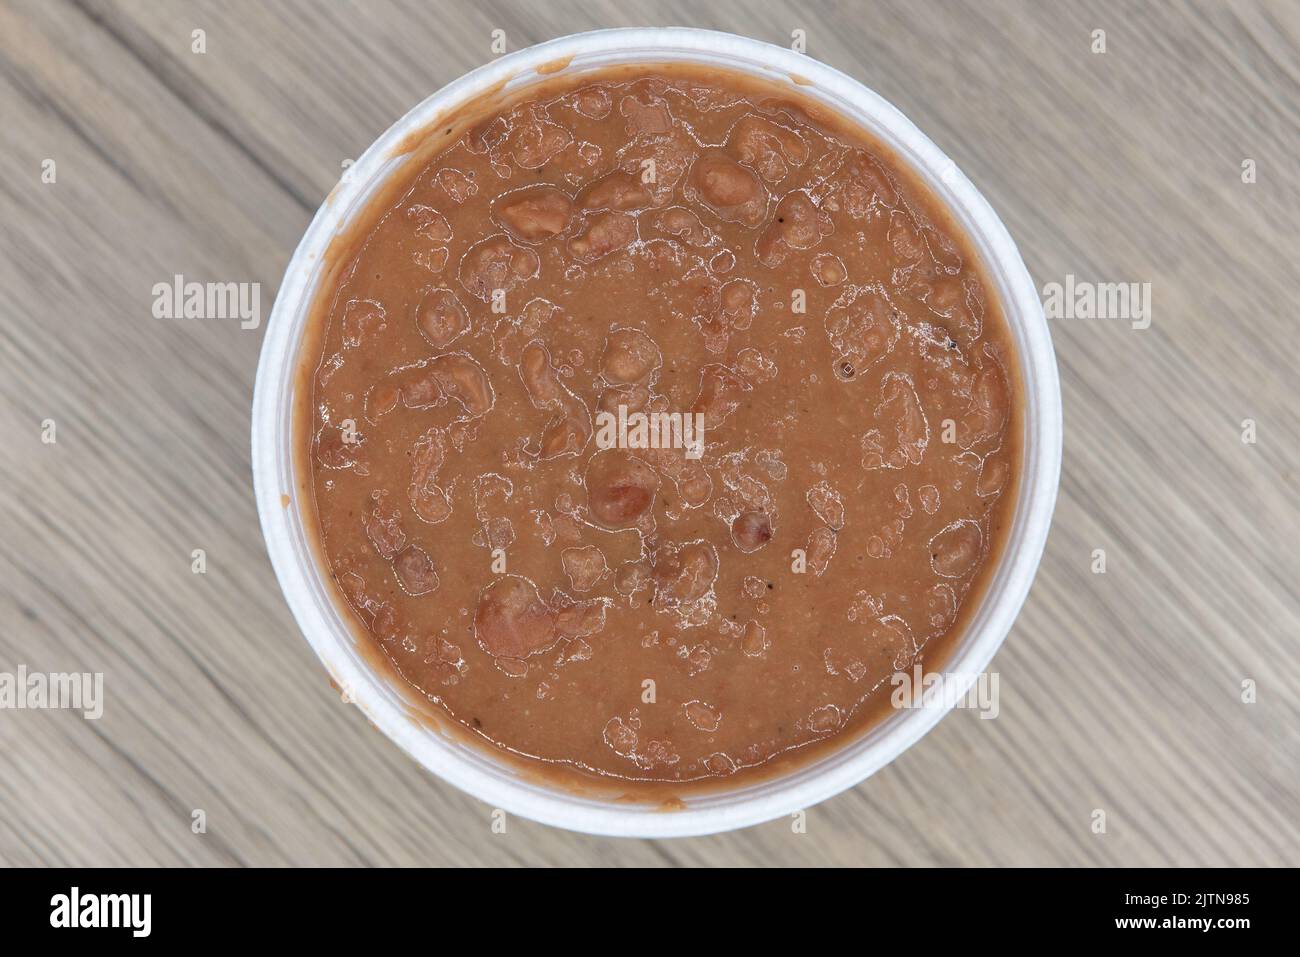 Overhead view of Mexican food needs a side order of authentic refried beans to complete the flavor of the meal. Stock Photo